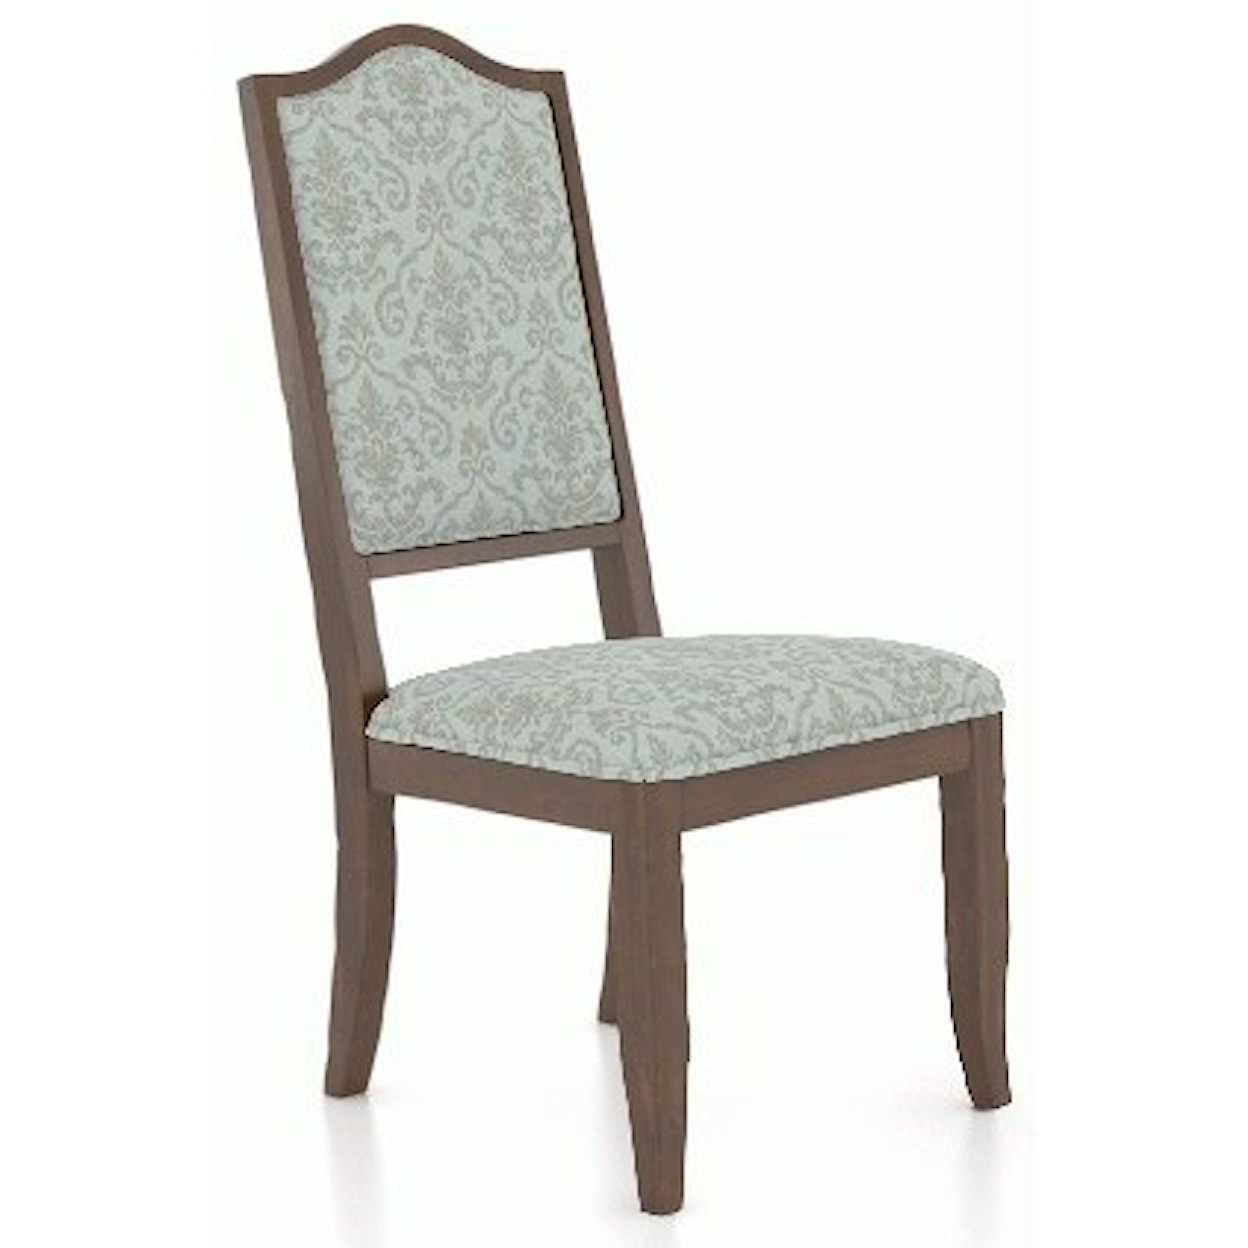 Canadel Classic Customizable Upholstered Side Chair